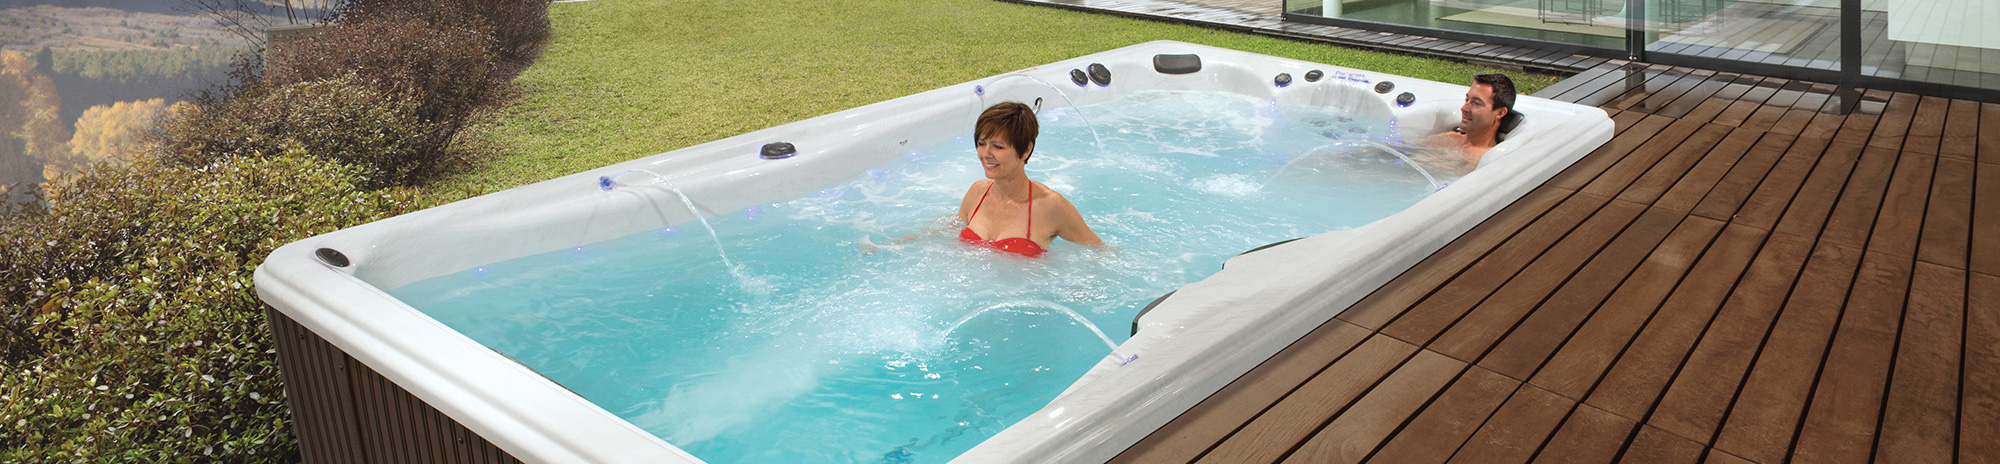 Spa Platinum Pro Hot Tub Spa And Pool Products All Made With Natural